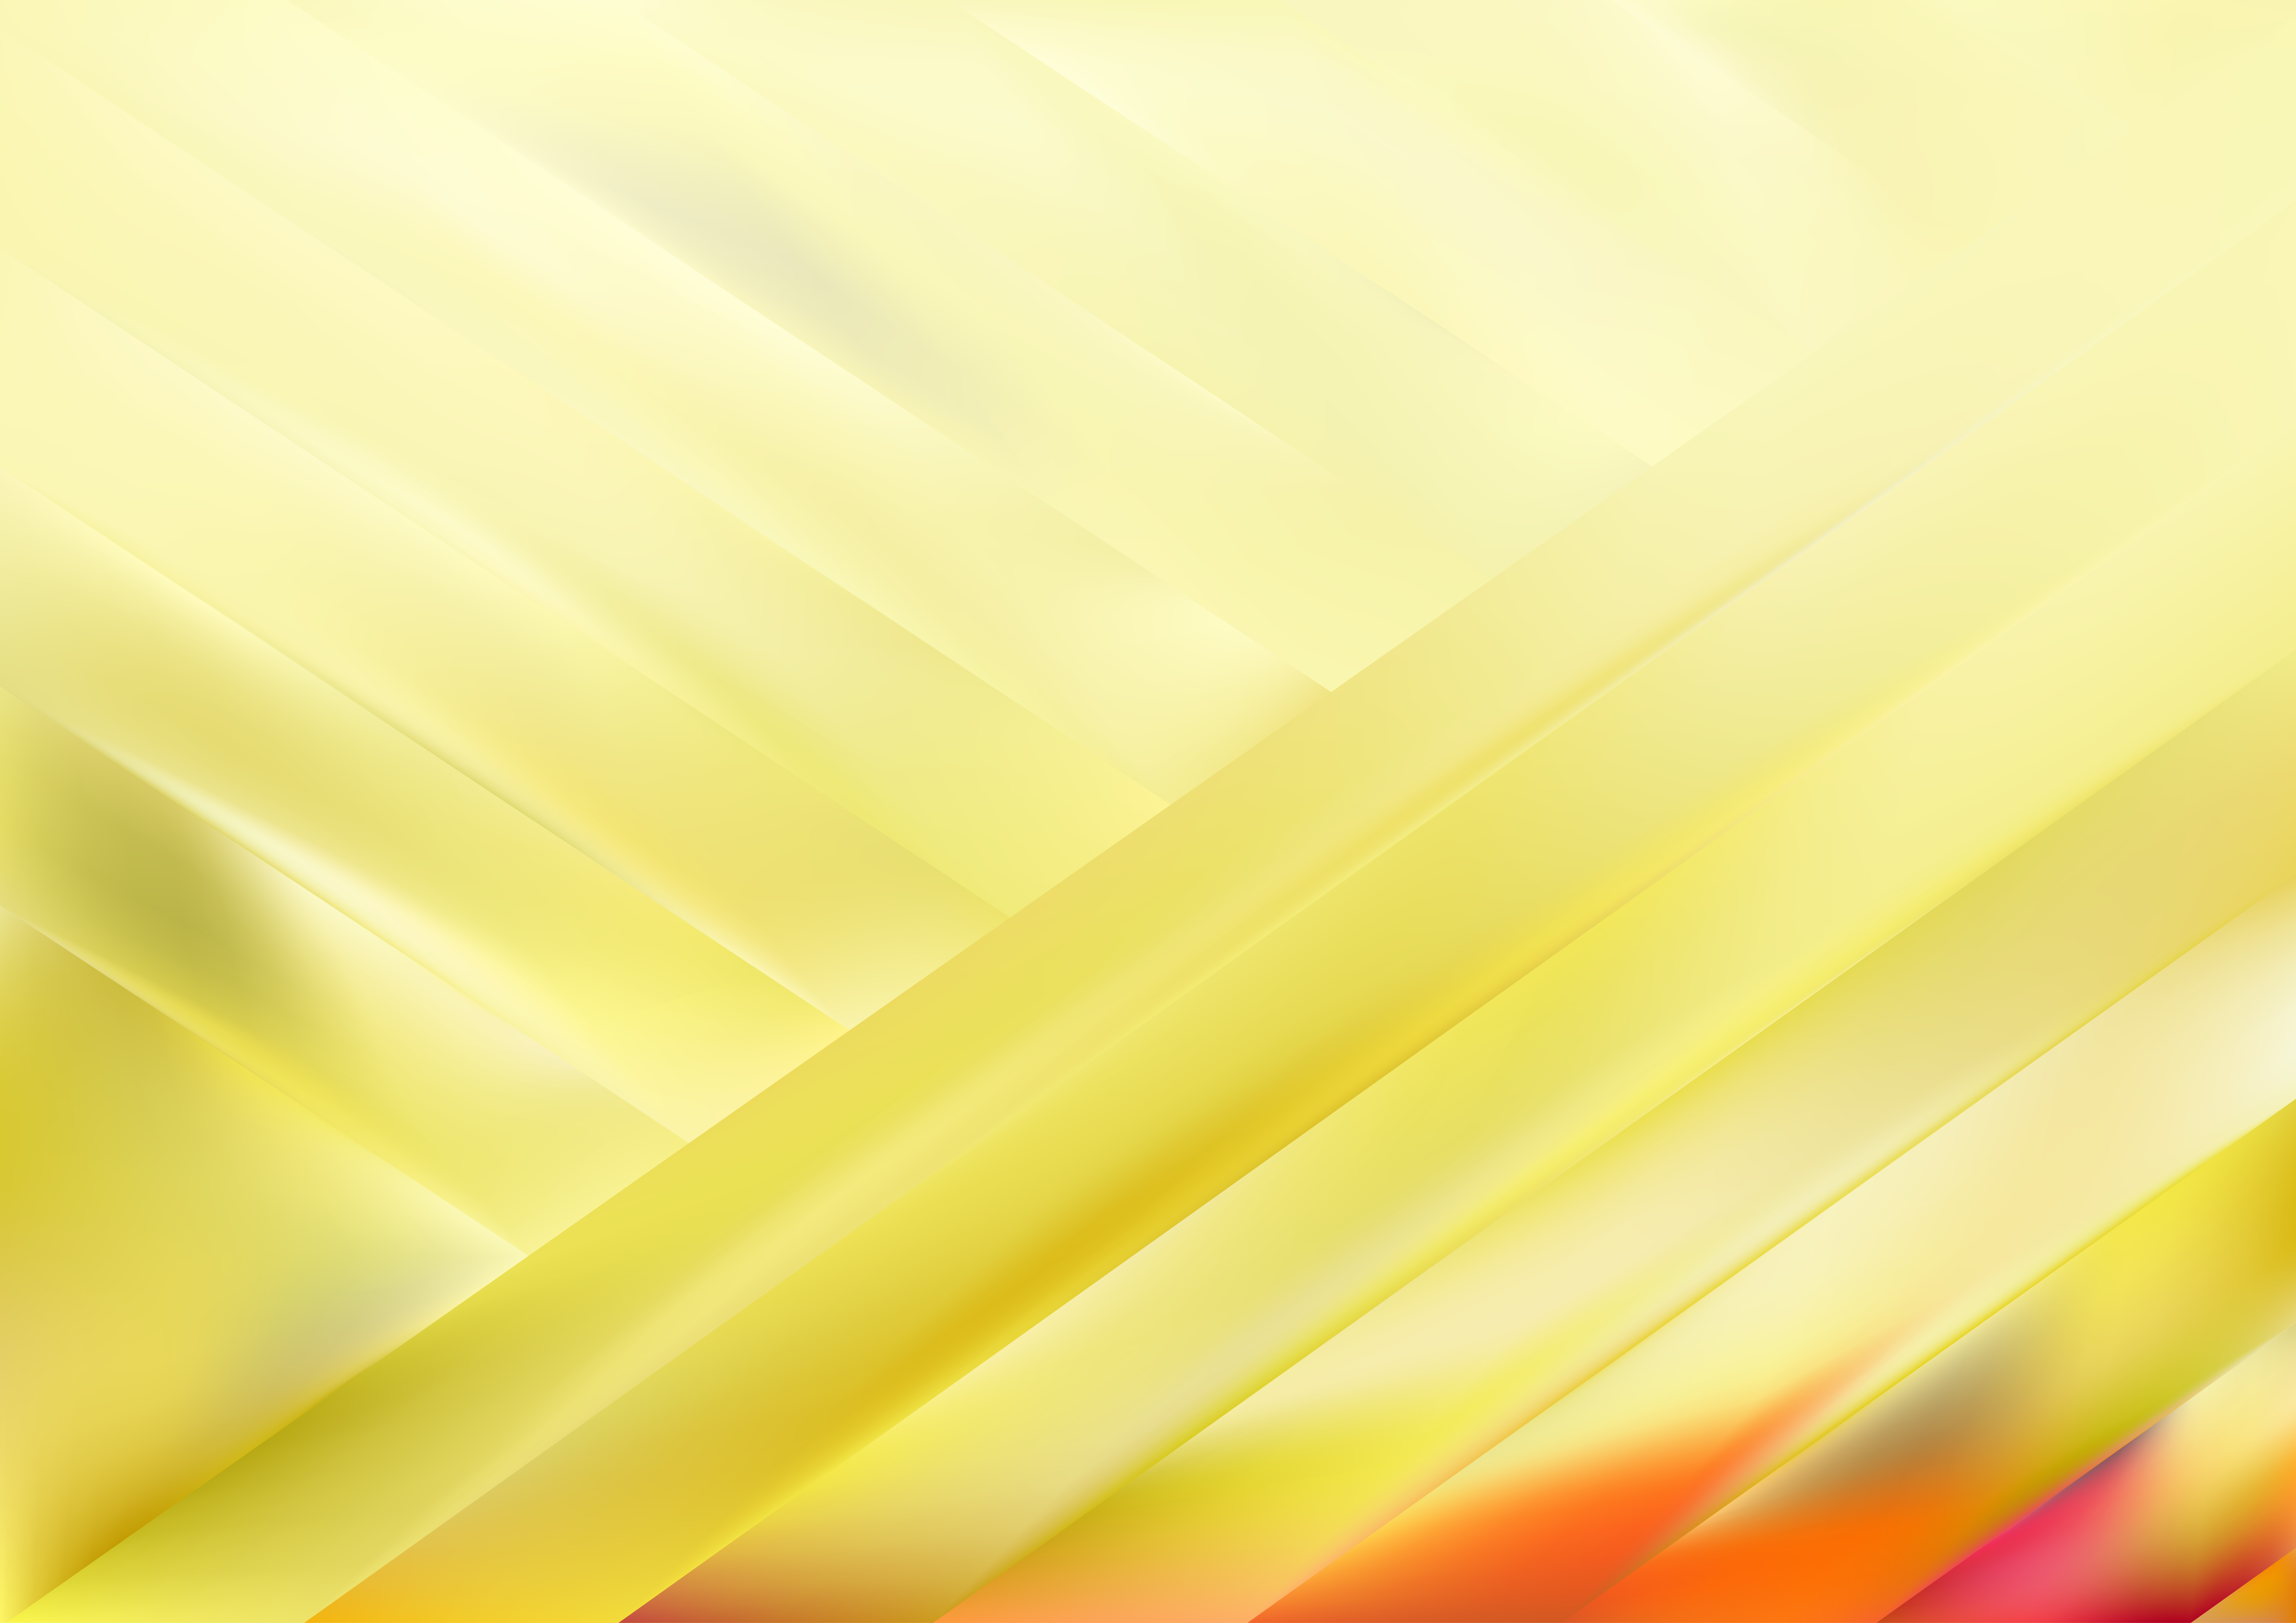 Free Shiny Abstract Orange and Yellow Background Vector Graphic